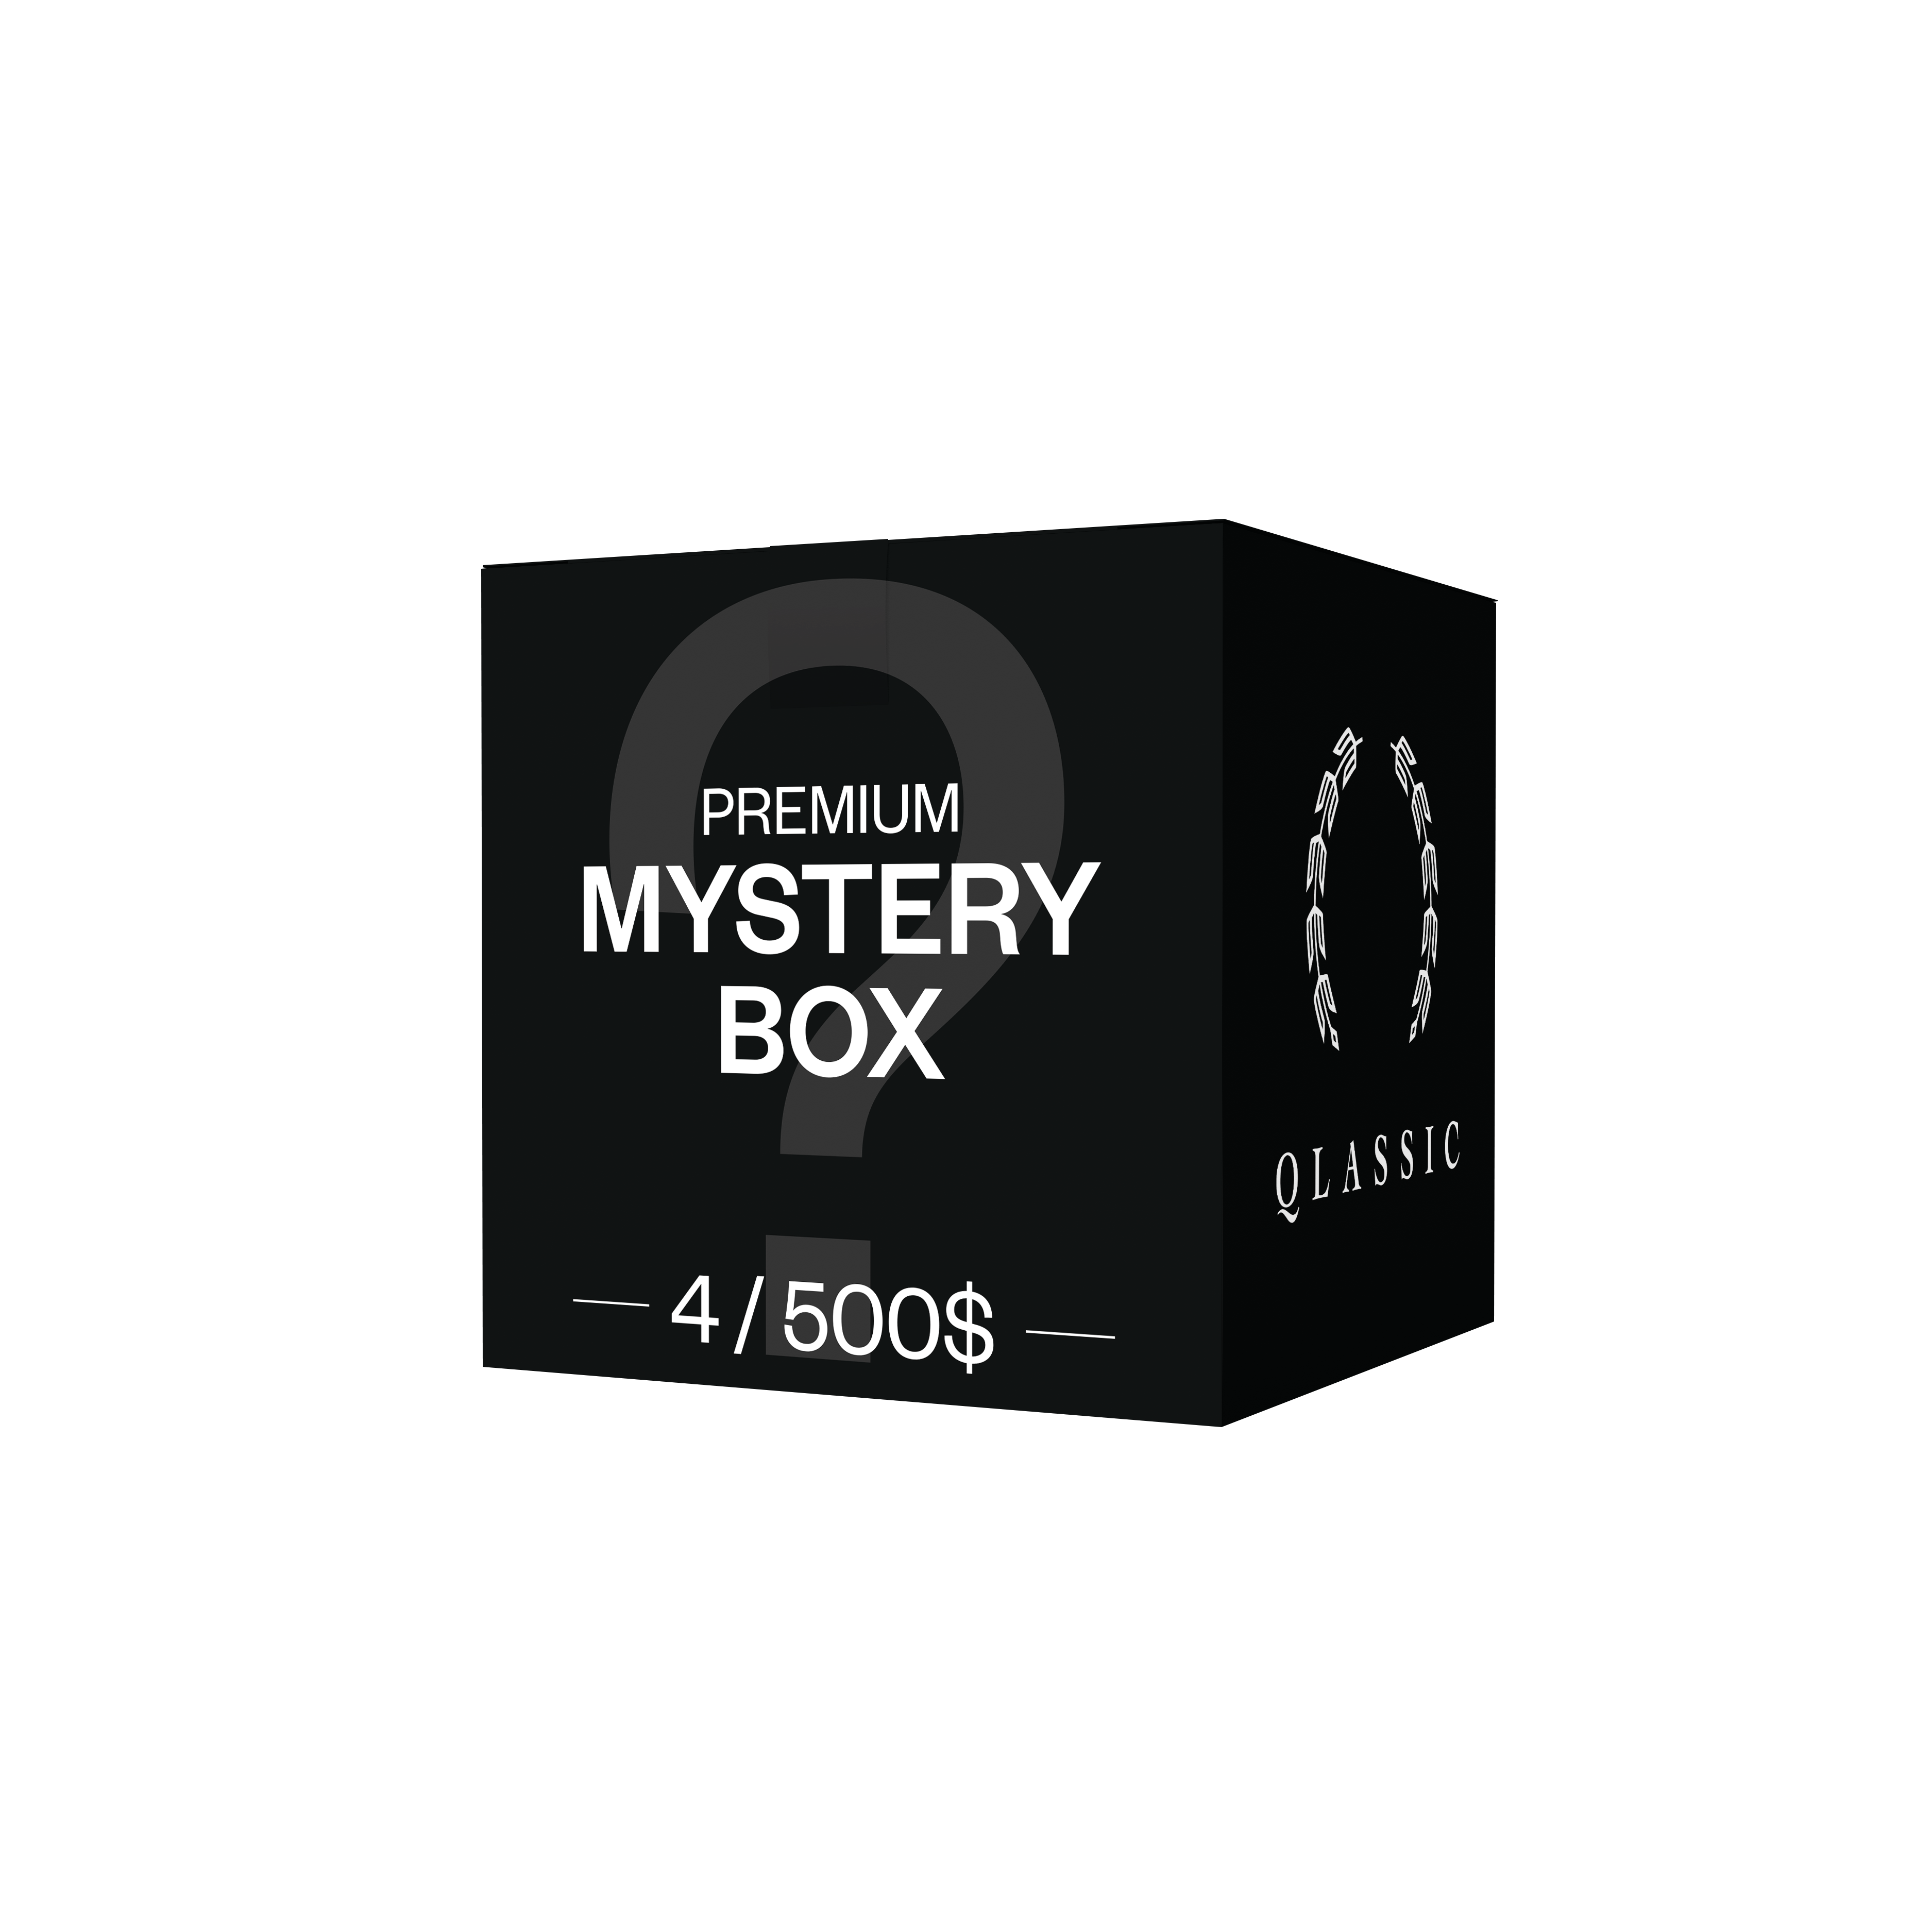 Premium Mystery Box - 4 SNEAKERS FOR 500$